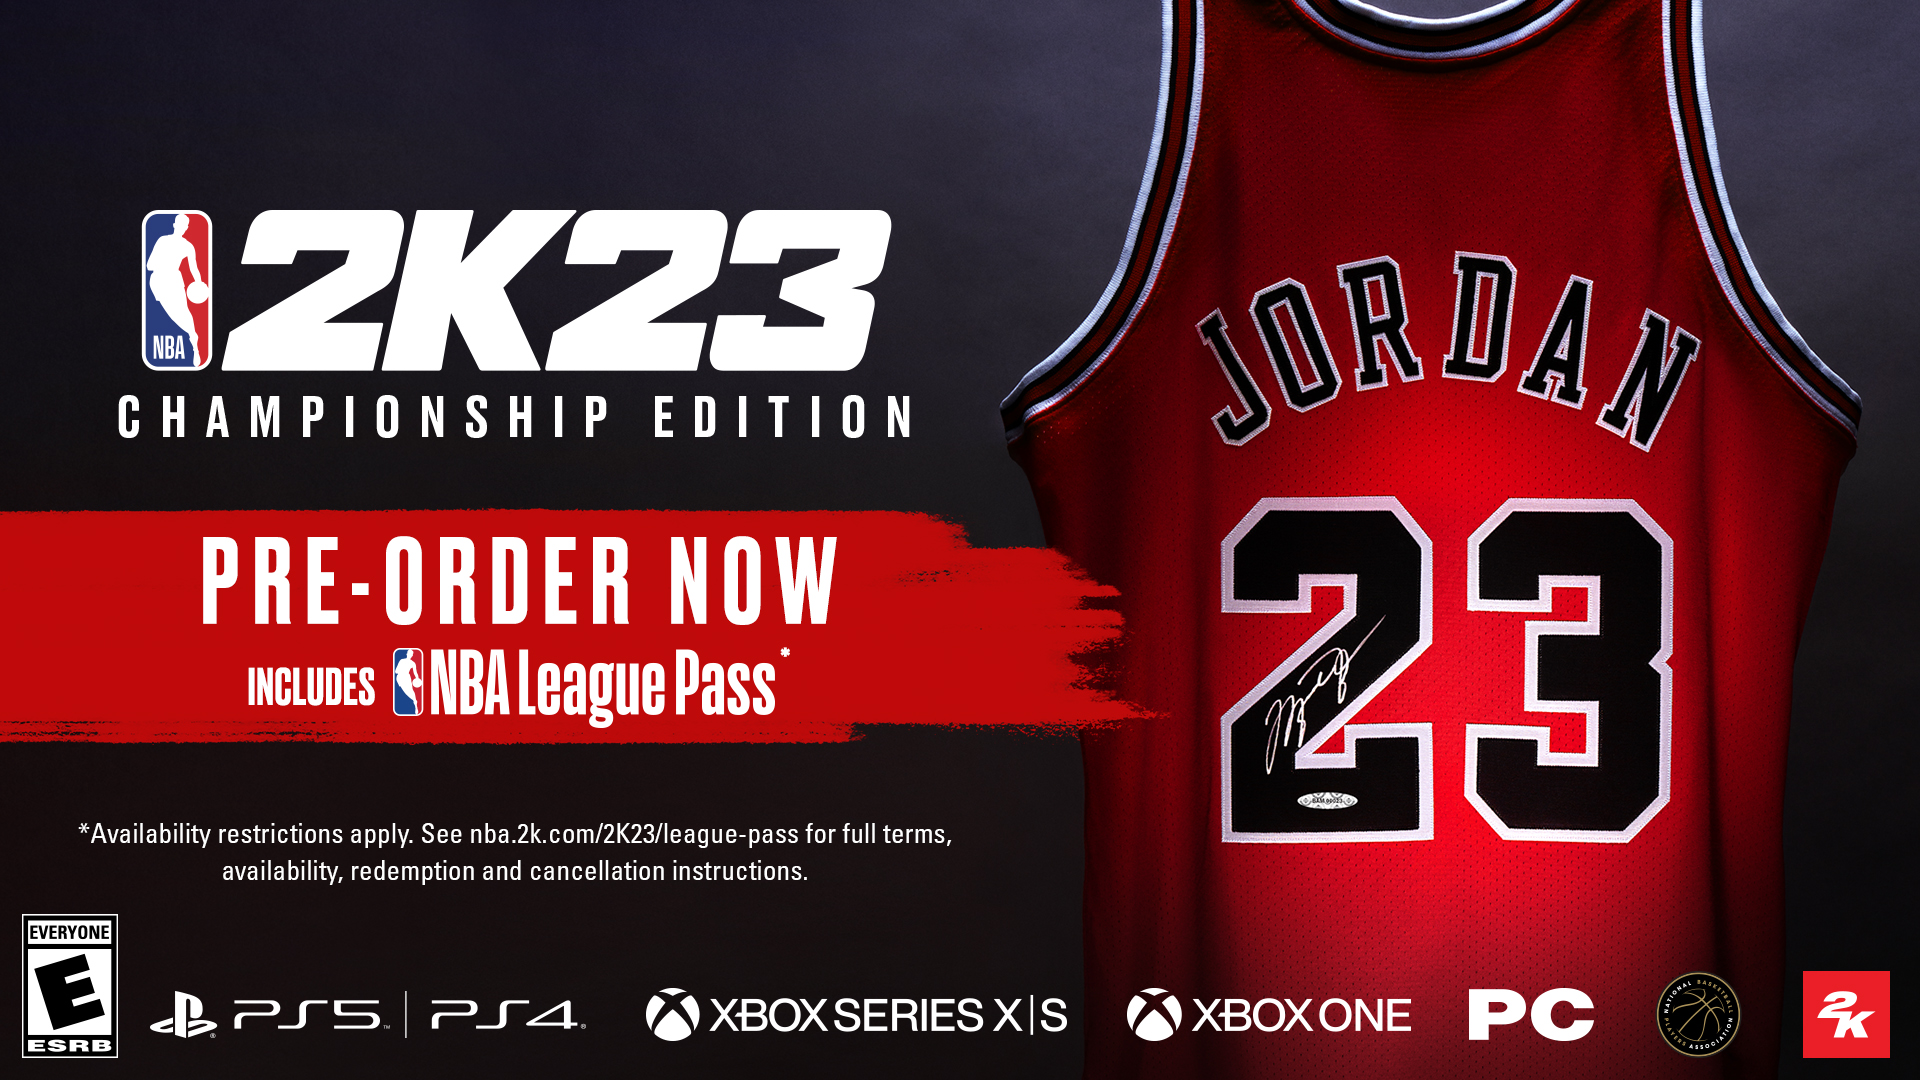 NBA 2K23's $150 Championship Edition includes a year of NBA League Pass